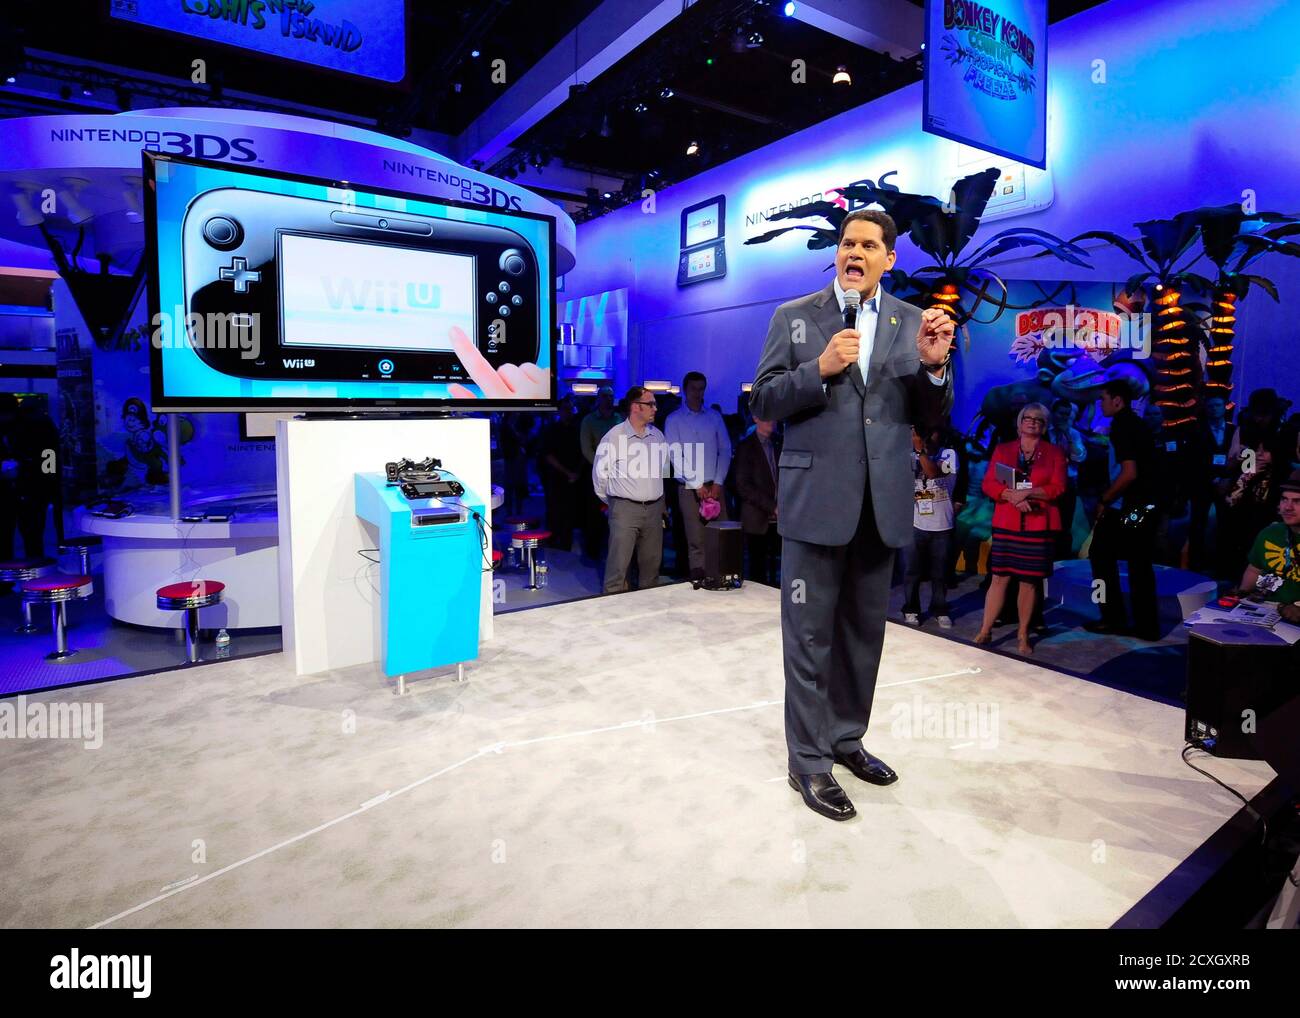 Nintendo of America President and Chief Operating Officer Reggie Fils-Aime  opens the Wii U Software Showcase at E3 in Los Angeles, California June 11,  2013. REUTERS/Gus Ruelas (UNITED STATES - Tags: BUSINESS